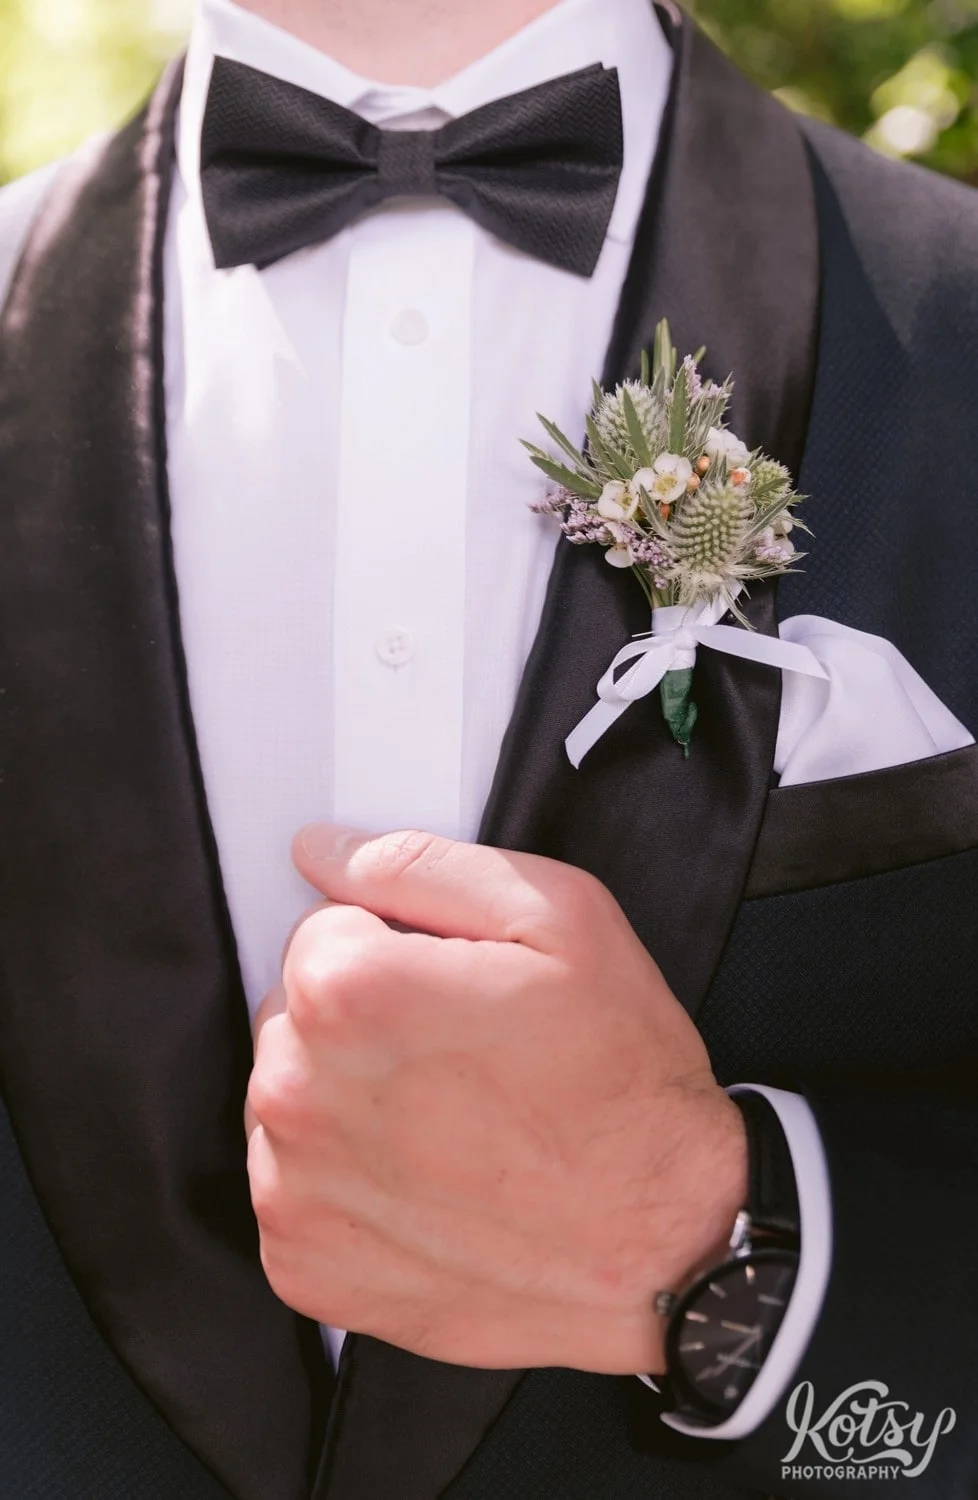 A close up shot of a groom's hand holding on to the lapel of a black tuxedo. A black bowtie and boutonniere is also seen